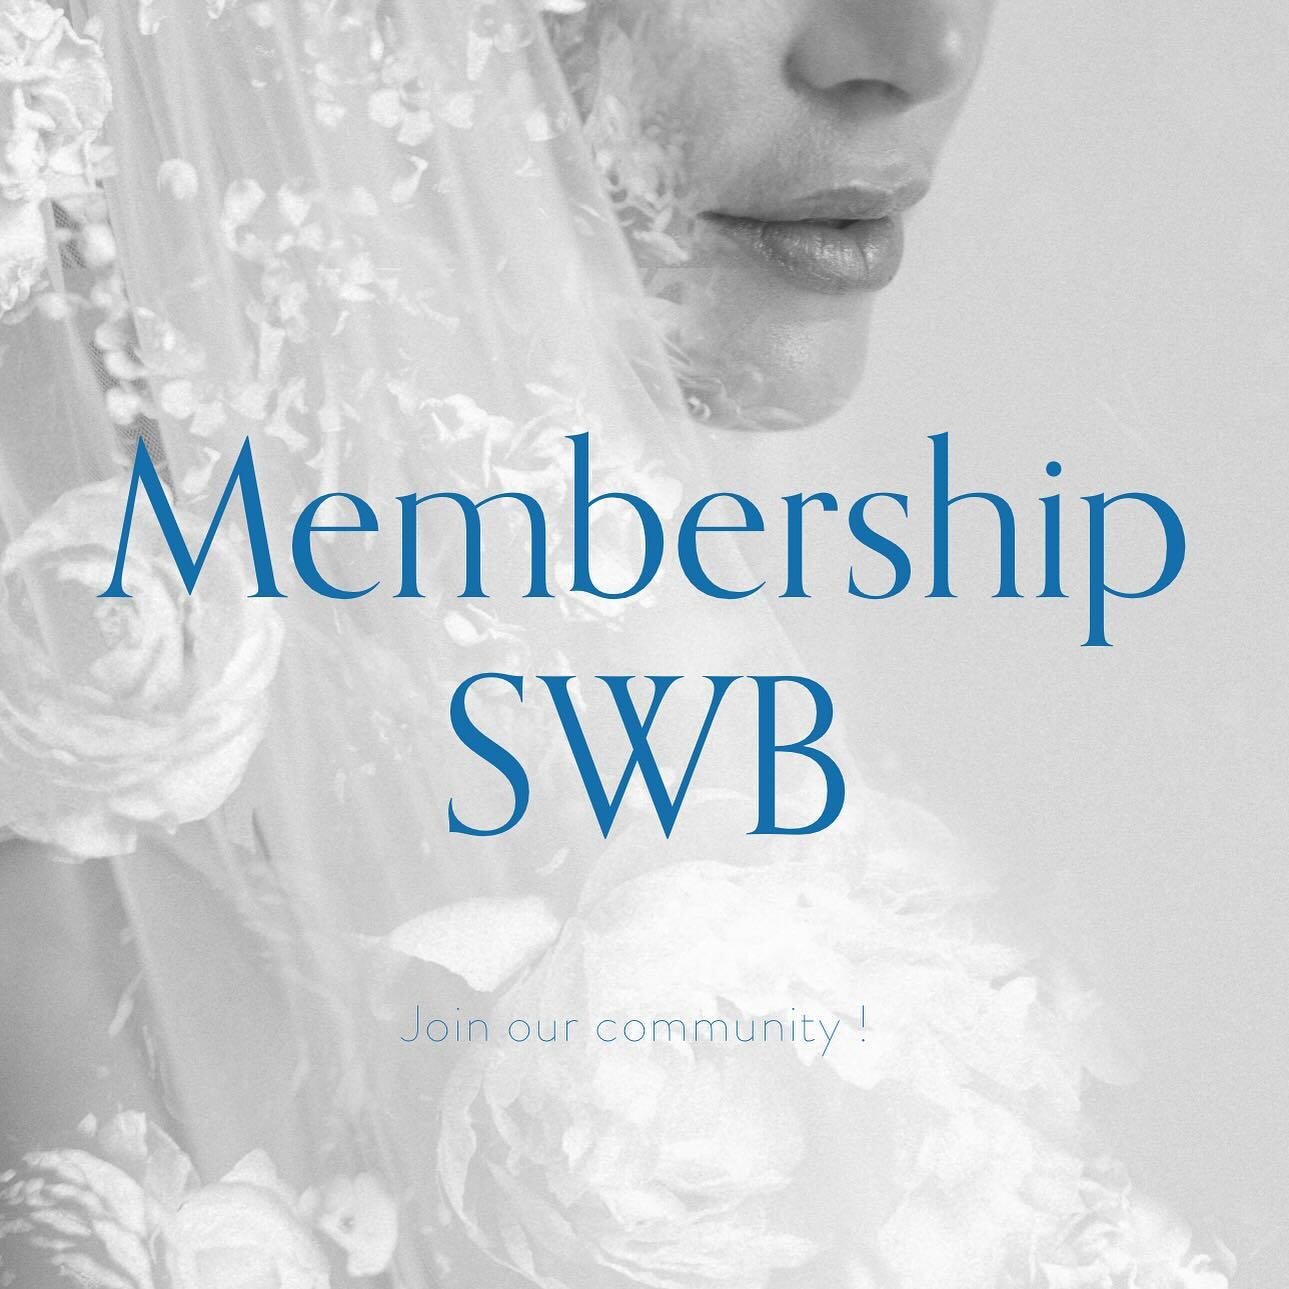 Don&rsquo;t miss our Launch Promotion !
JOIN THE ADRESS BOOK AND ADVERTISE WITH SWB
-
We have analyzed that there is not really a single big platform for couples and wedding providers of Switzerland to present their work but also show the world the b